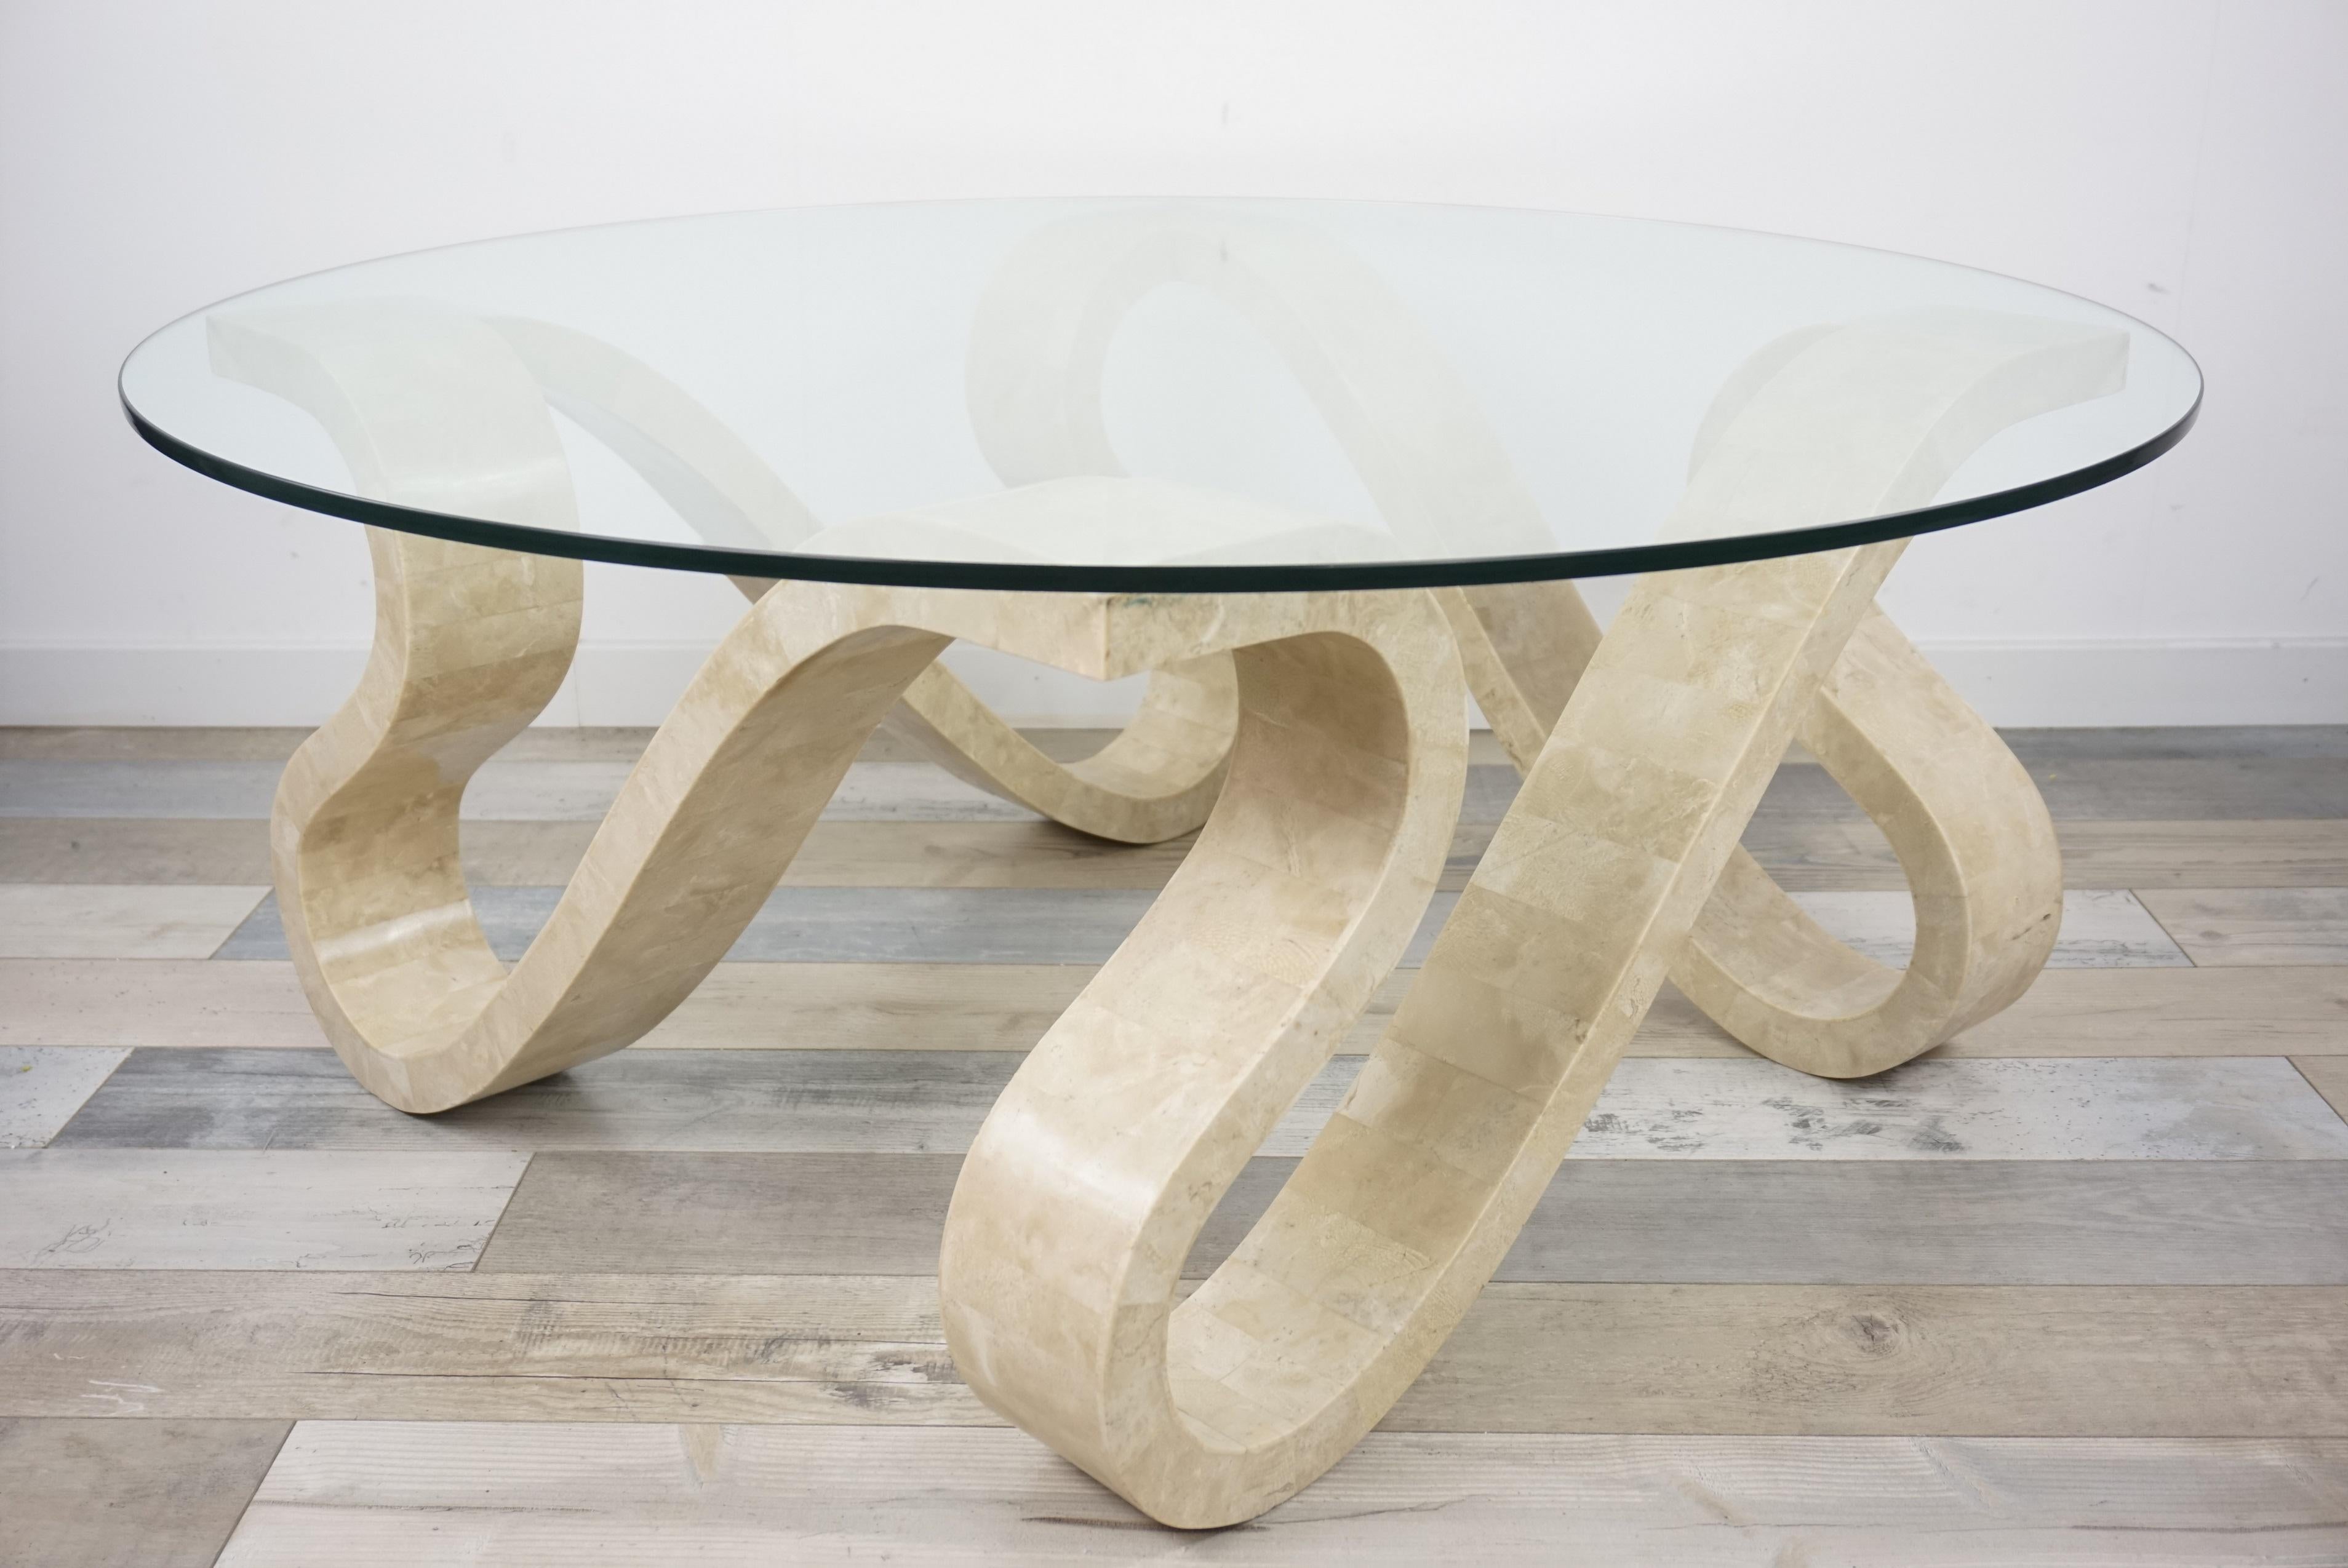 Tessellated Travertine Marquetry and Round Glass Tray Coffee Table (Europäisch)